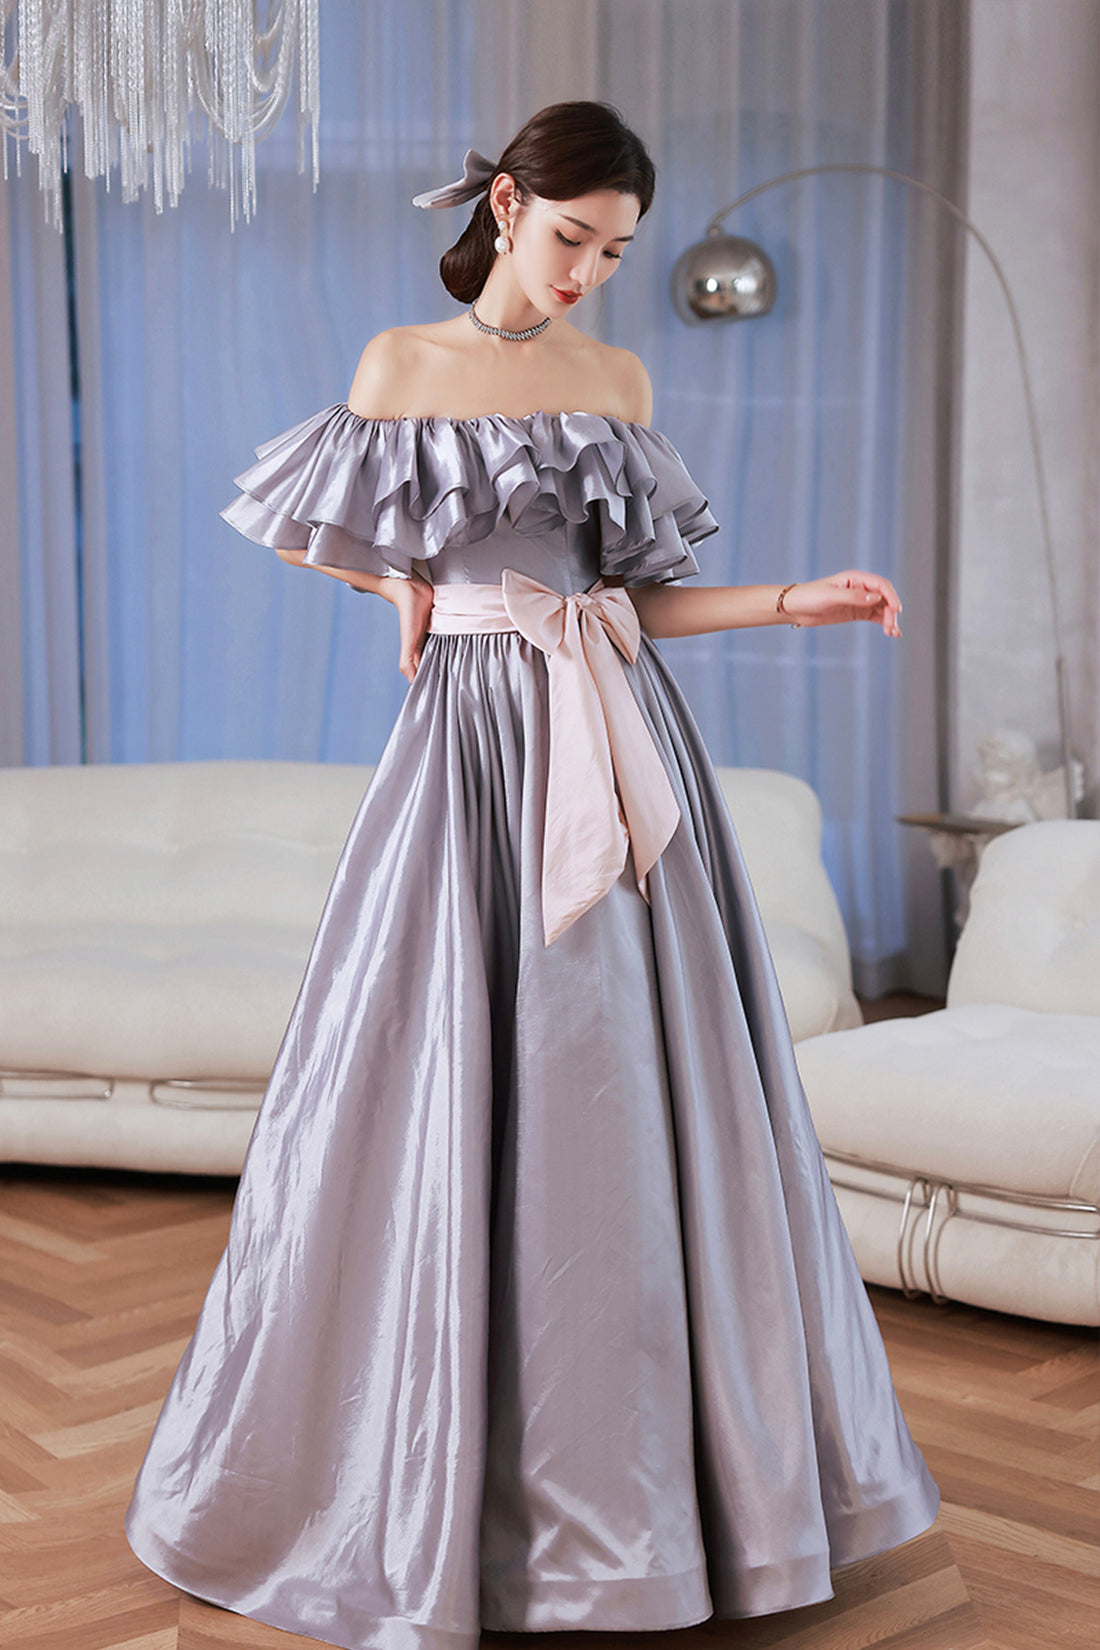 Lovely Satin Floor Length Prom Dress, Off Shoulder Evening Dress with Bow